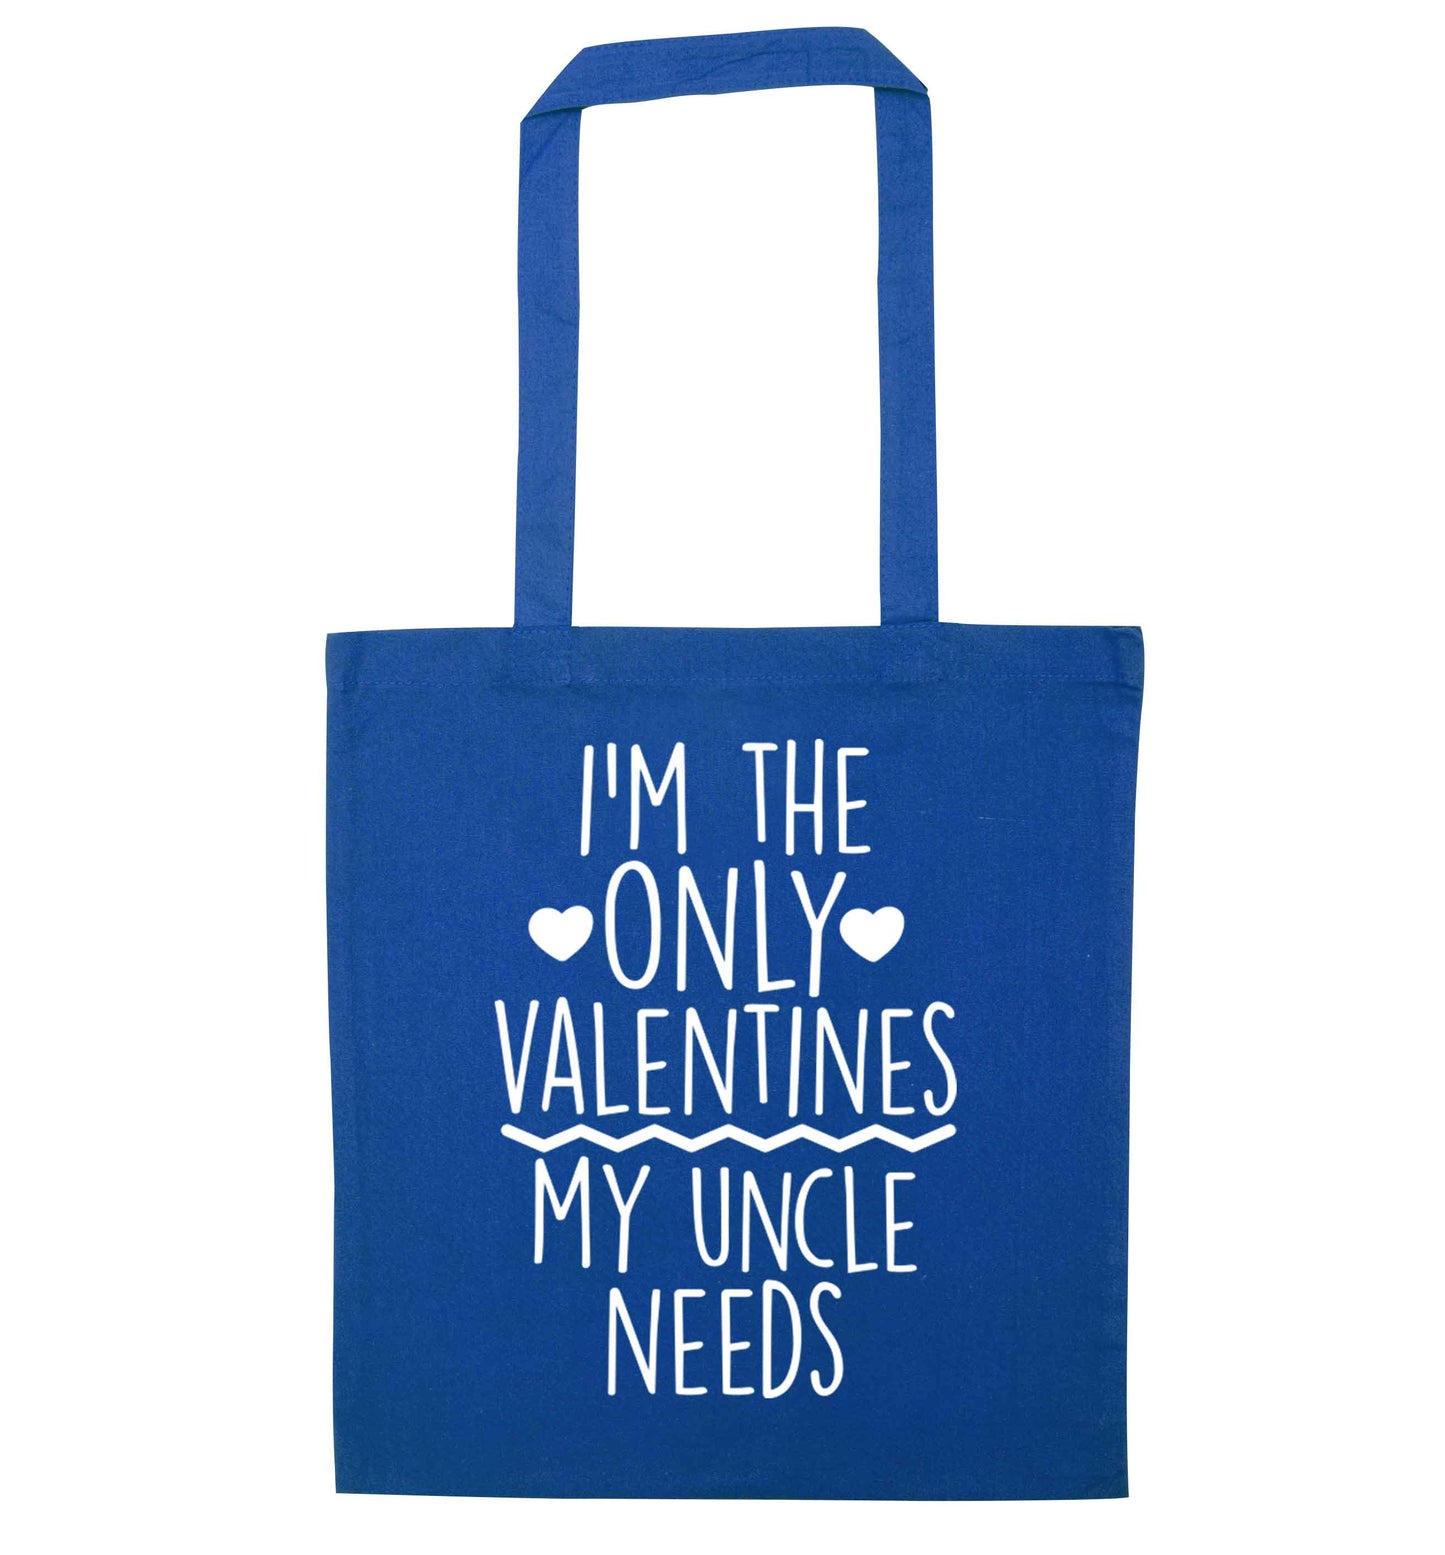 I'm the only valentines my uncle needs blue tote bag